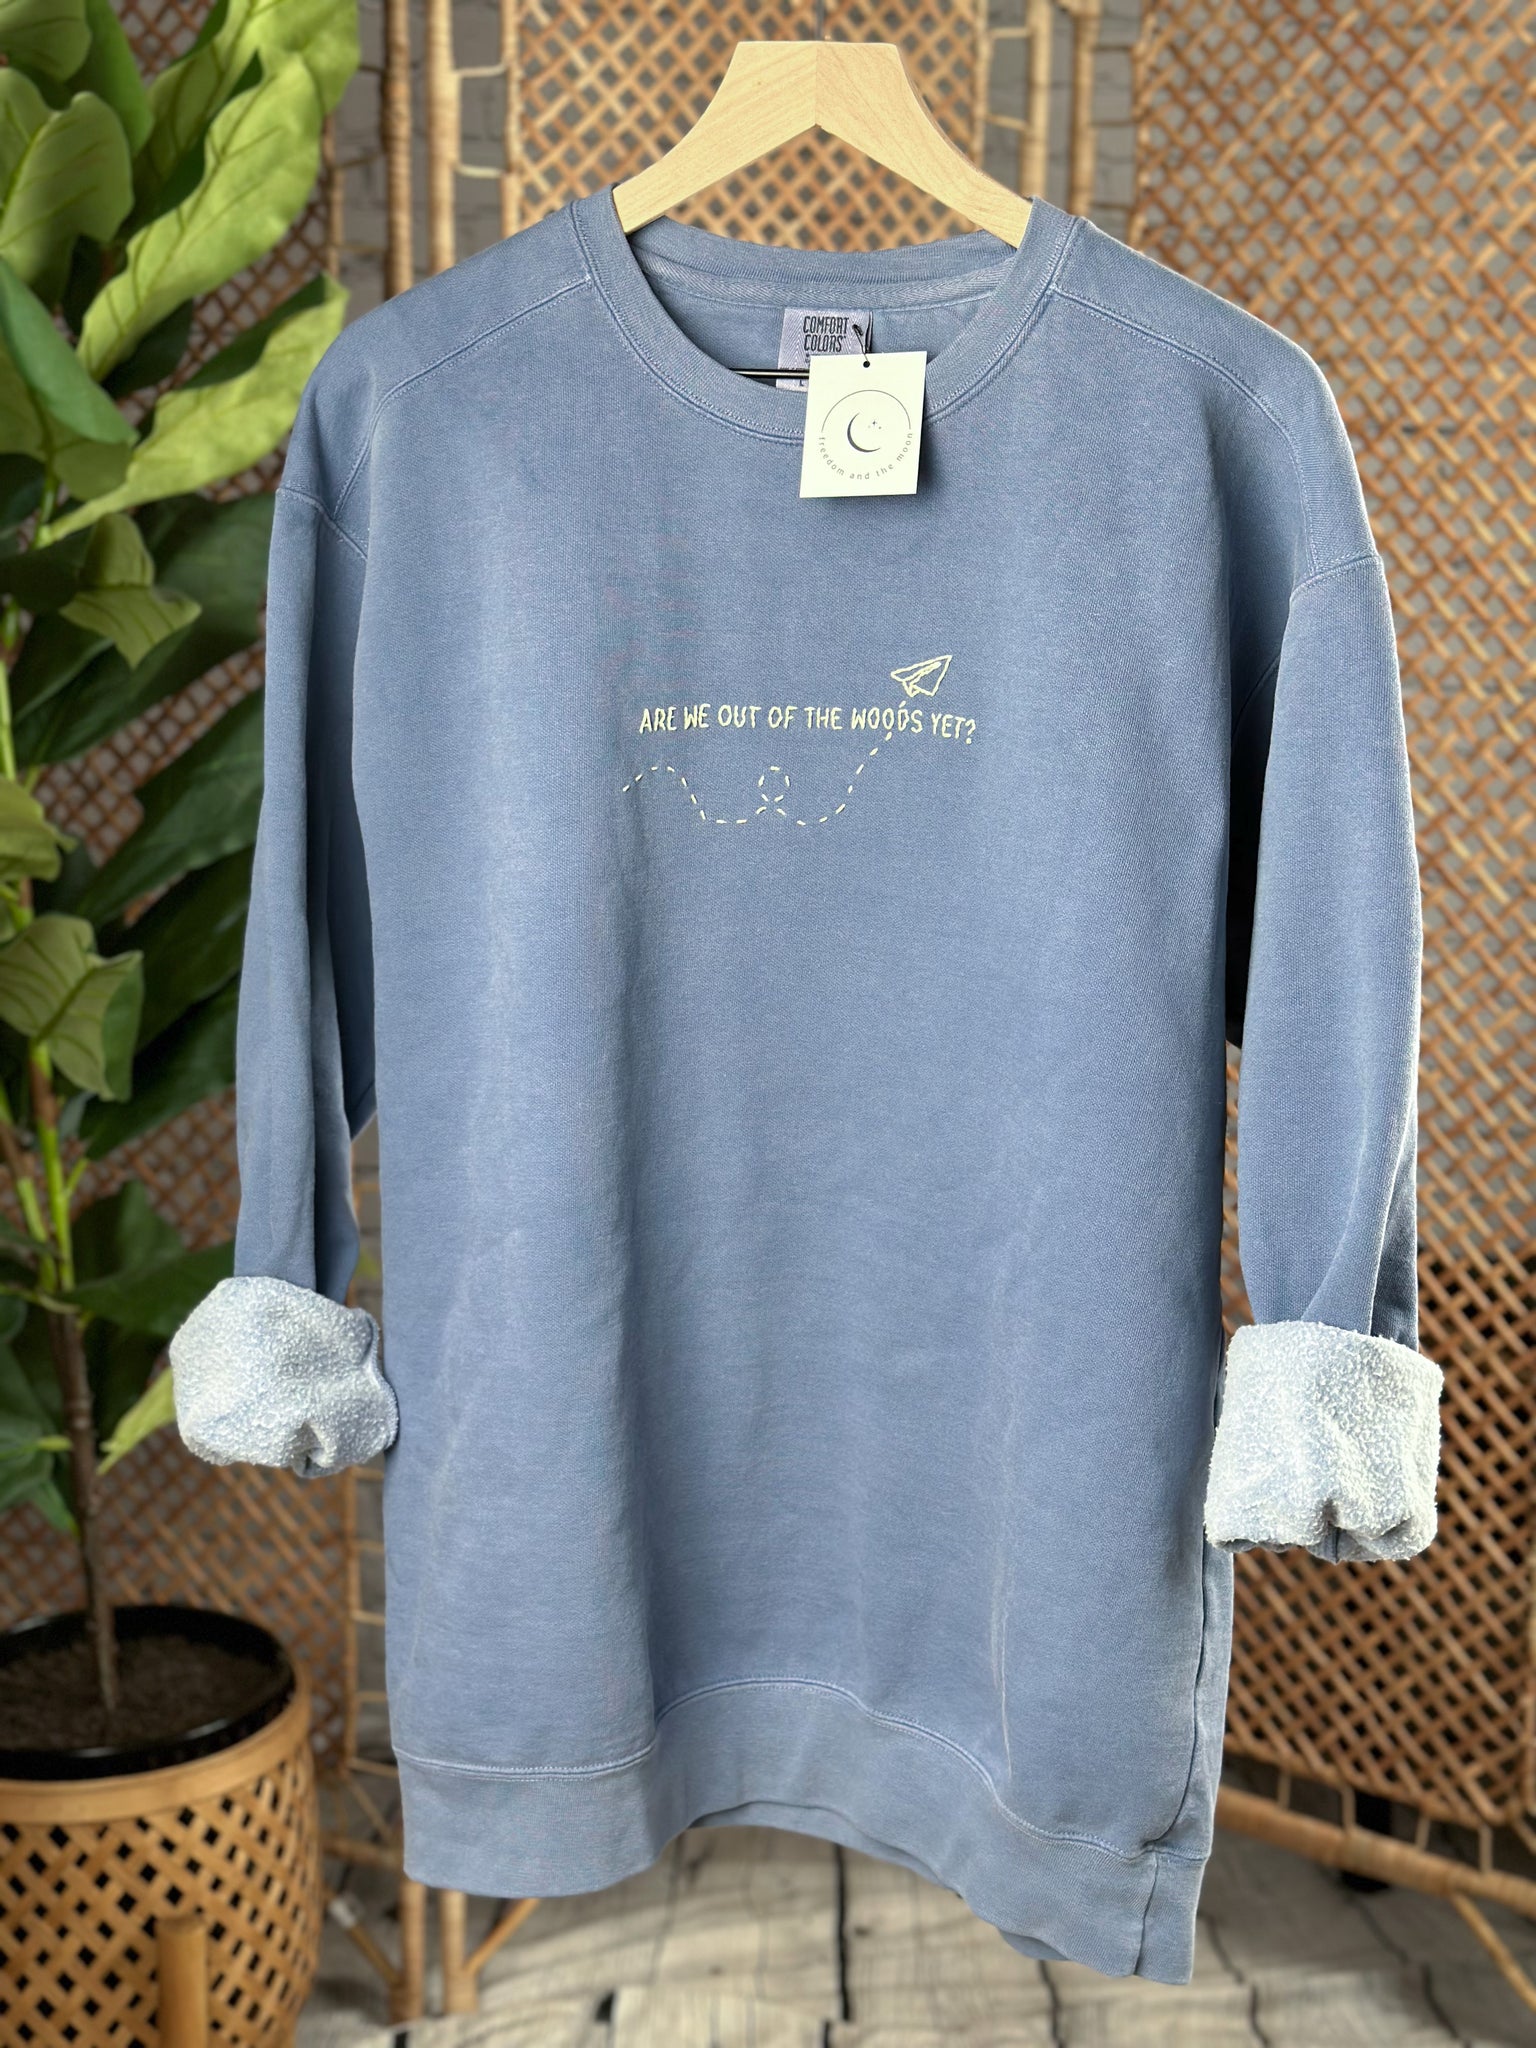 Hand Stitched Out of the Woods Sweatshirt